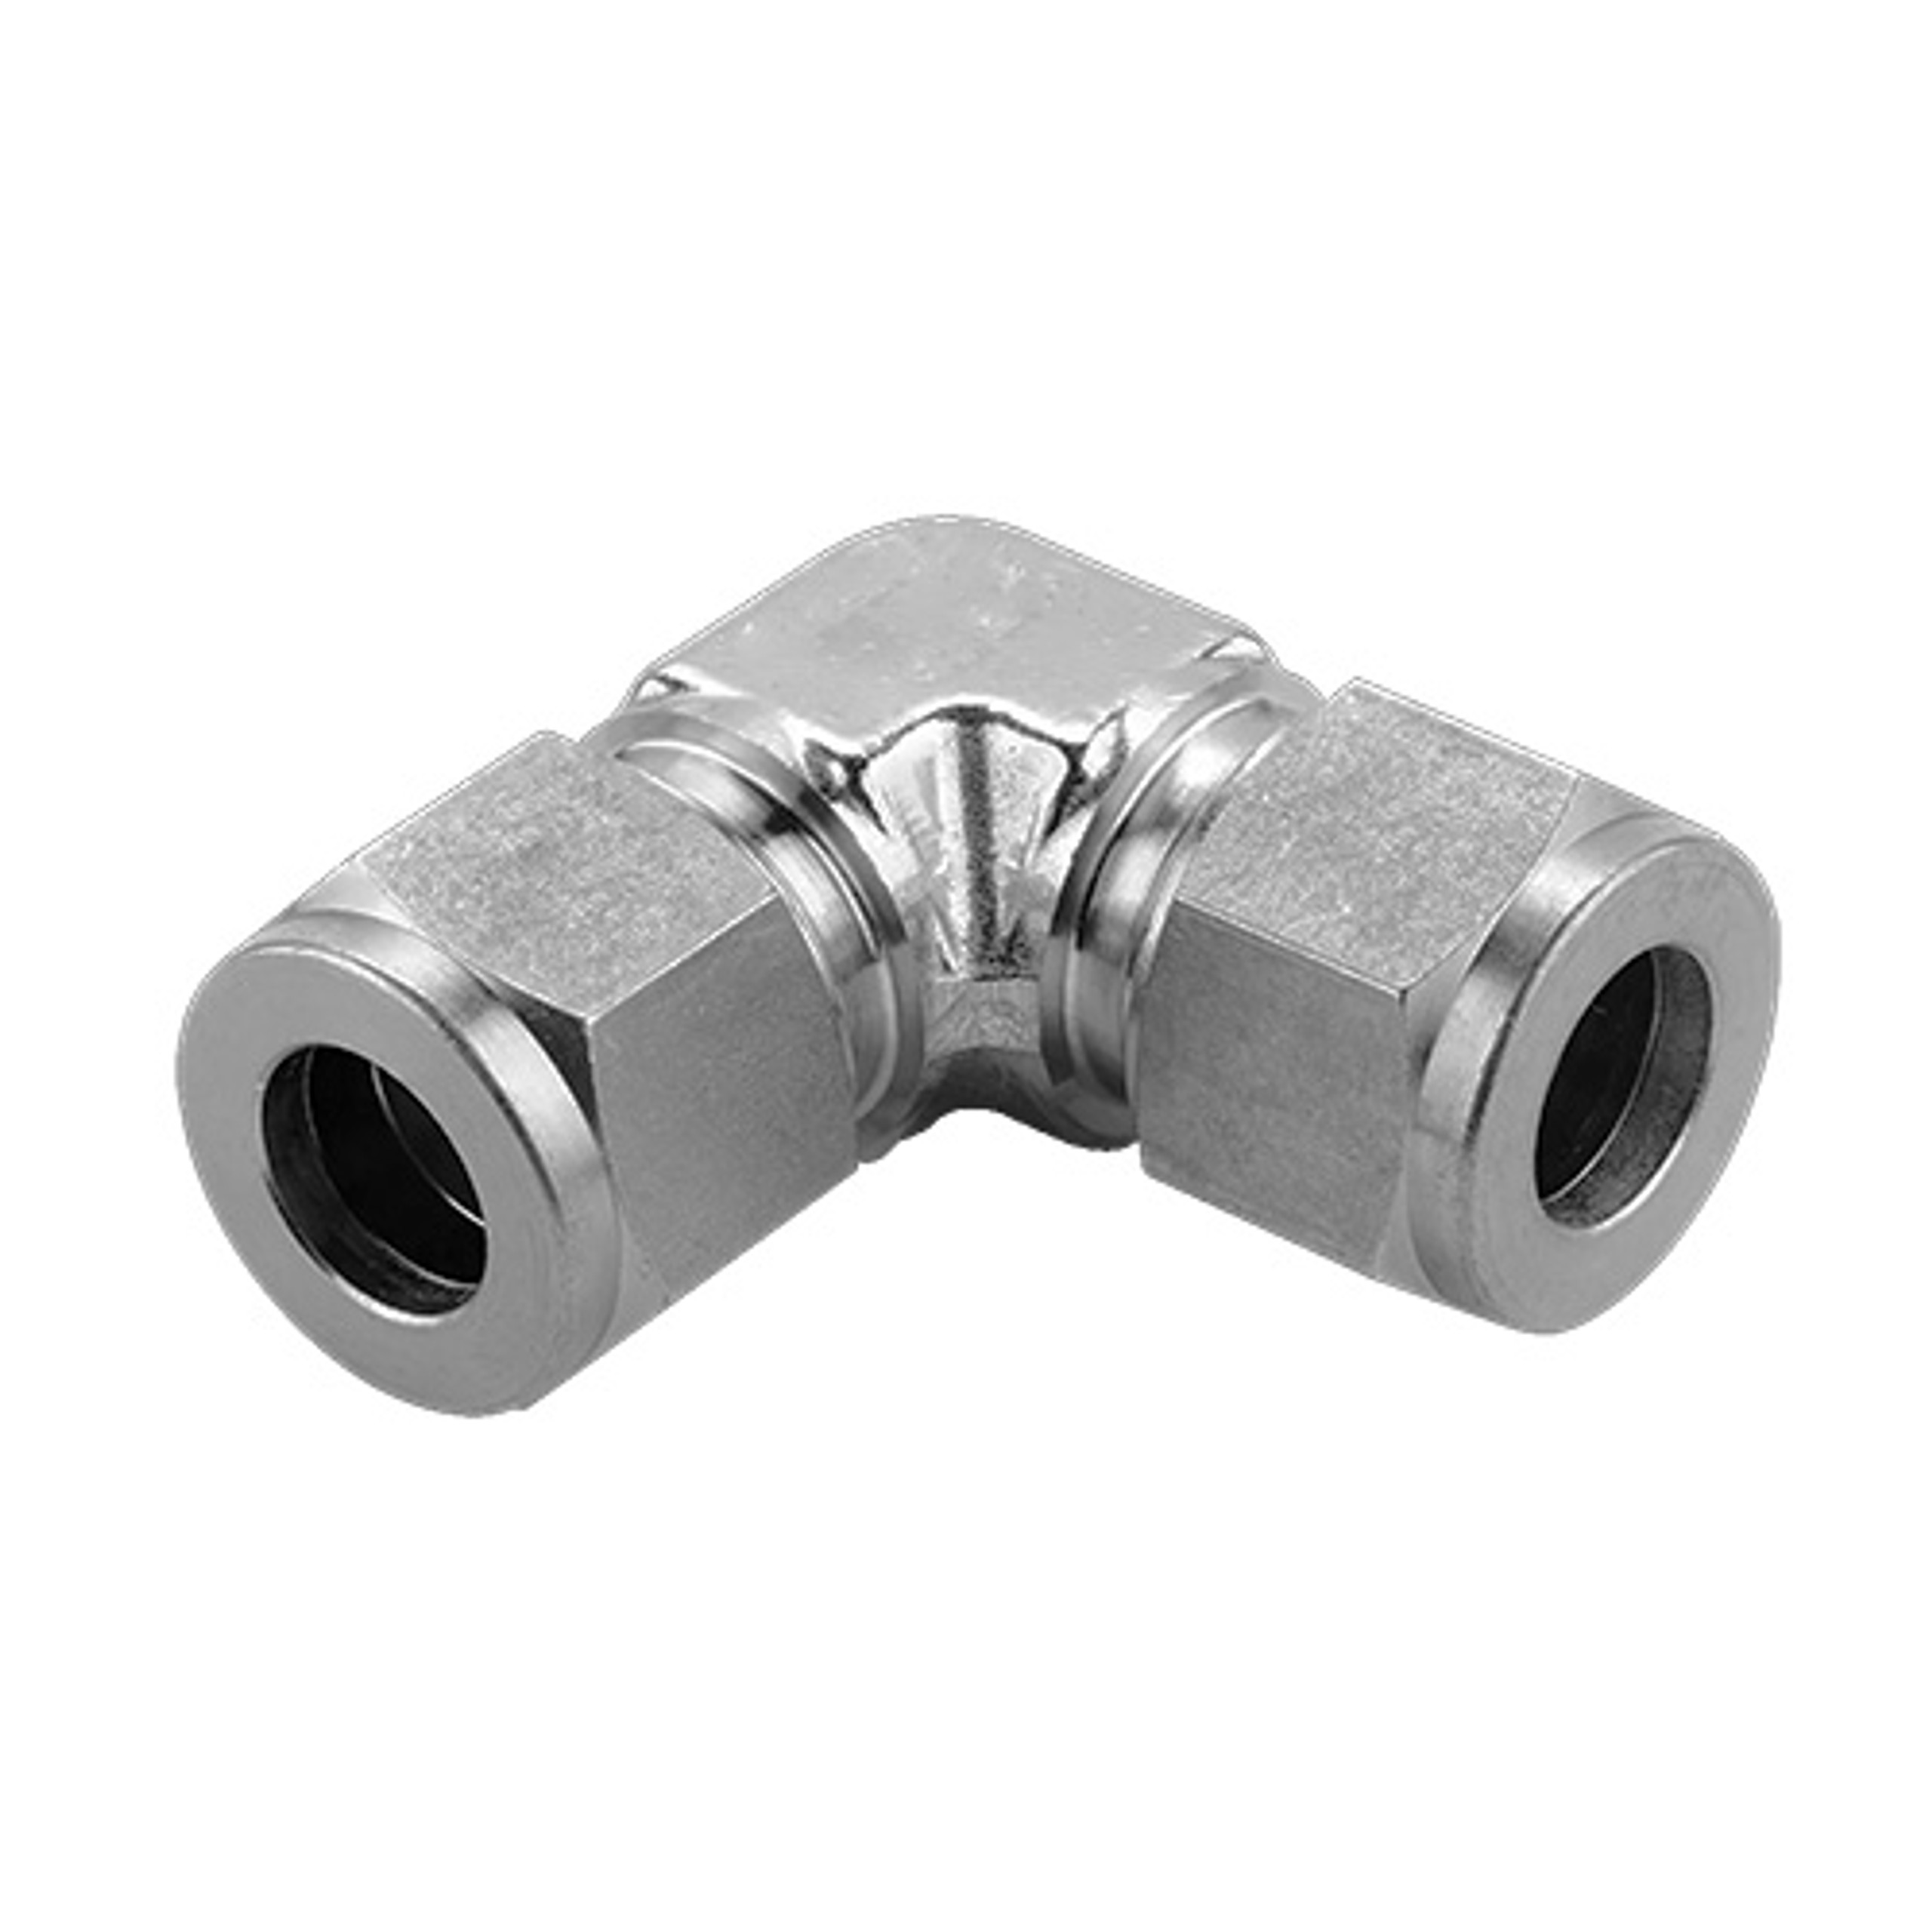 Stainless Steel Fittings - Tube Union Elbows - 3/4